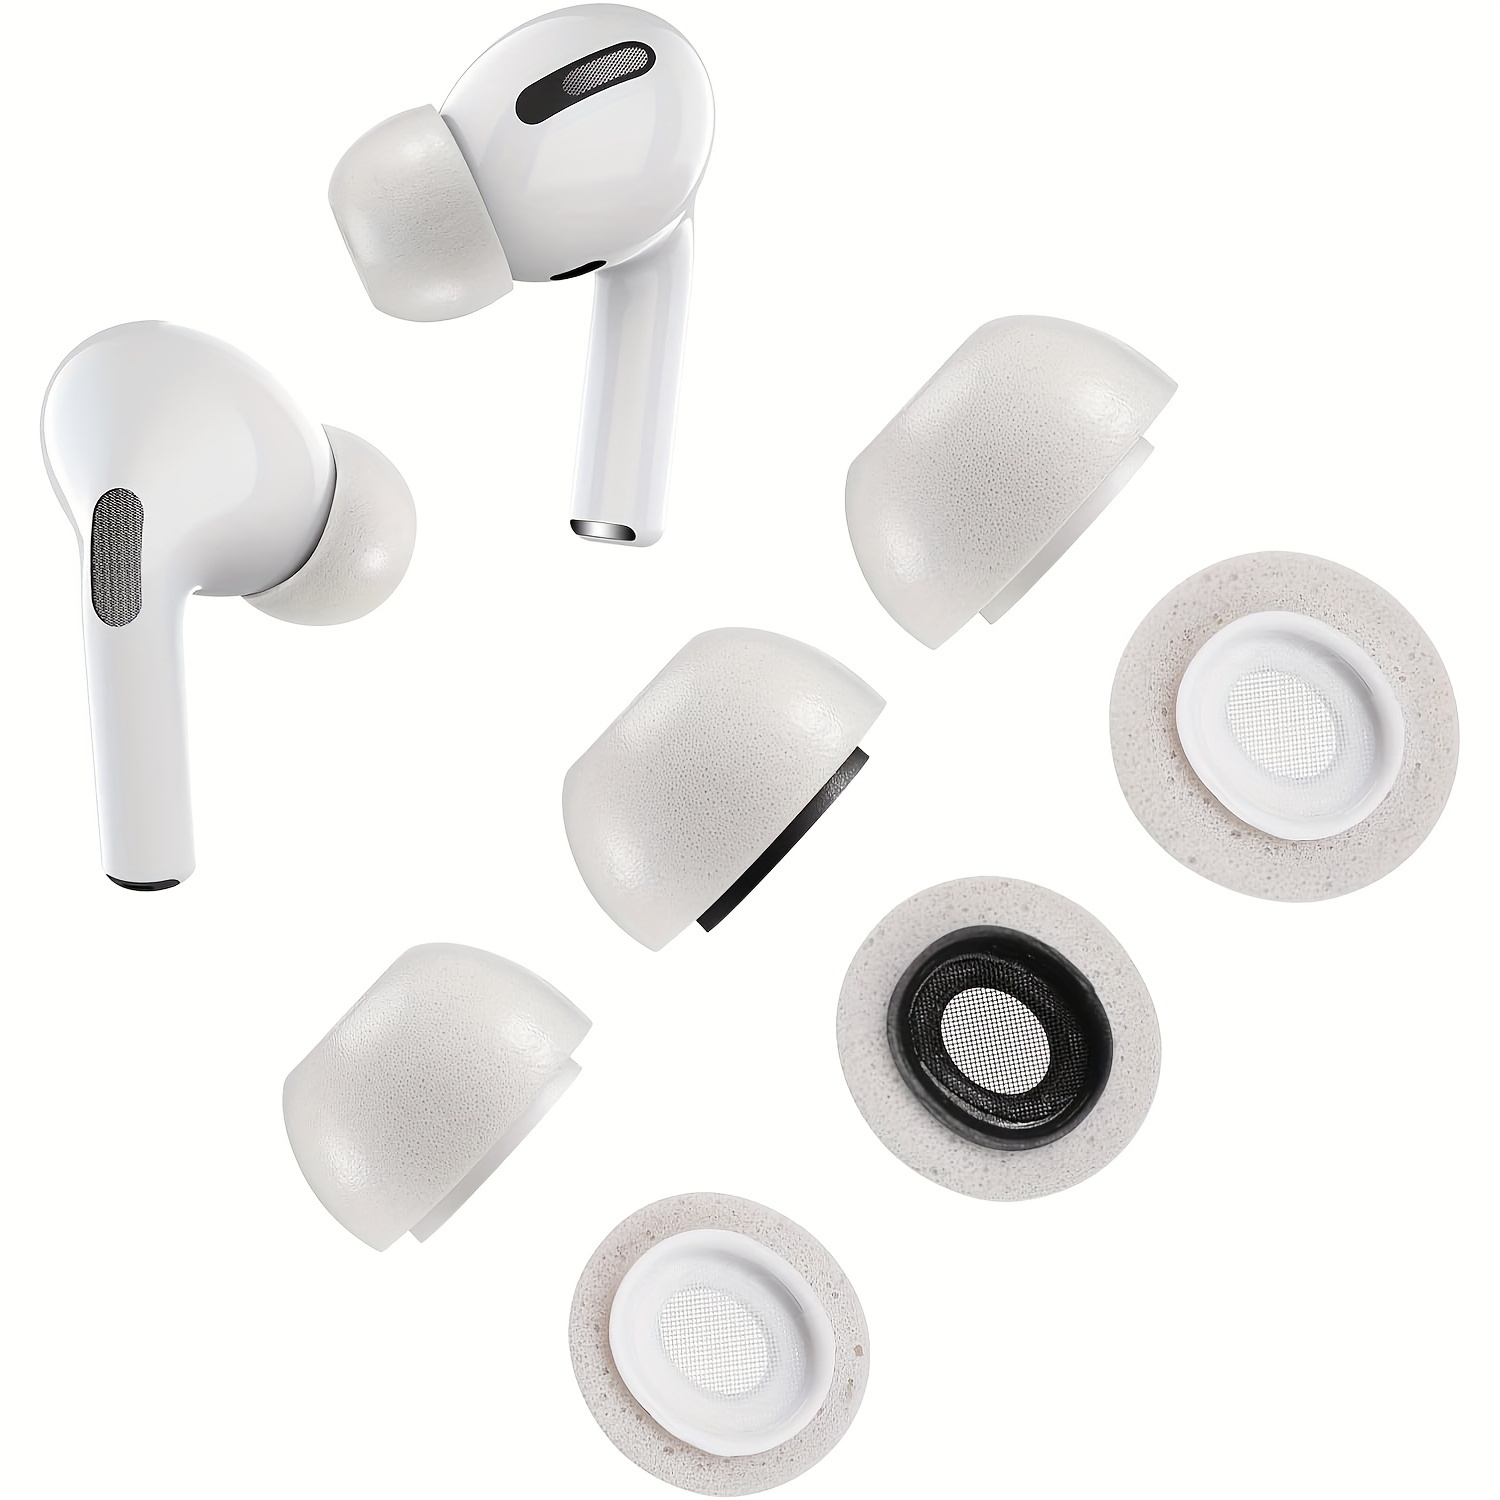 

Memory Foam Replacement Premium Ear Tips For Airpods Pro Wireless Earbuds, Ultra-comfort, Noise Reduction, Anti-slip Eartips, Fit In The Charging Case, Easy Install, 3-paris Mixed Sizes